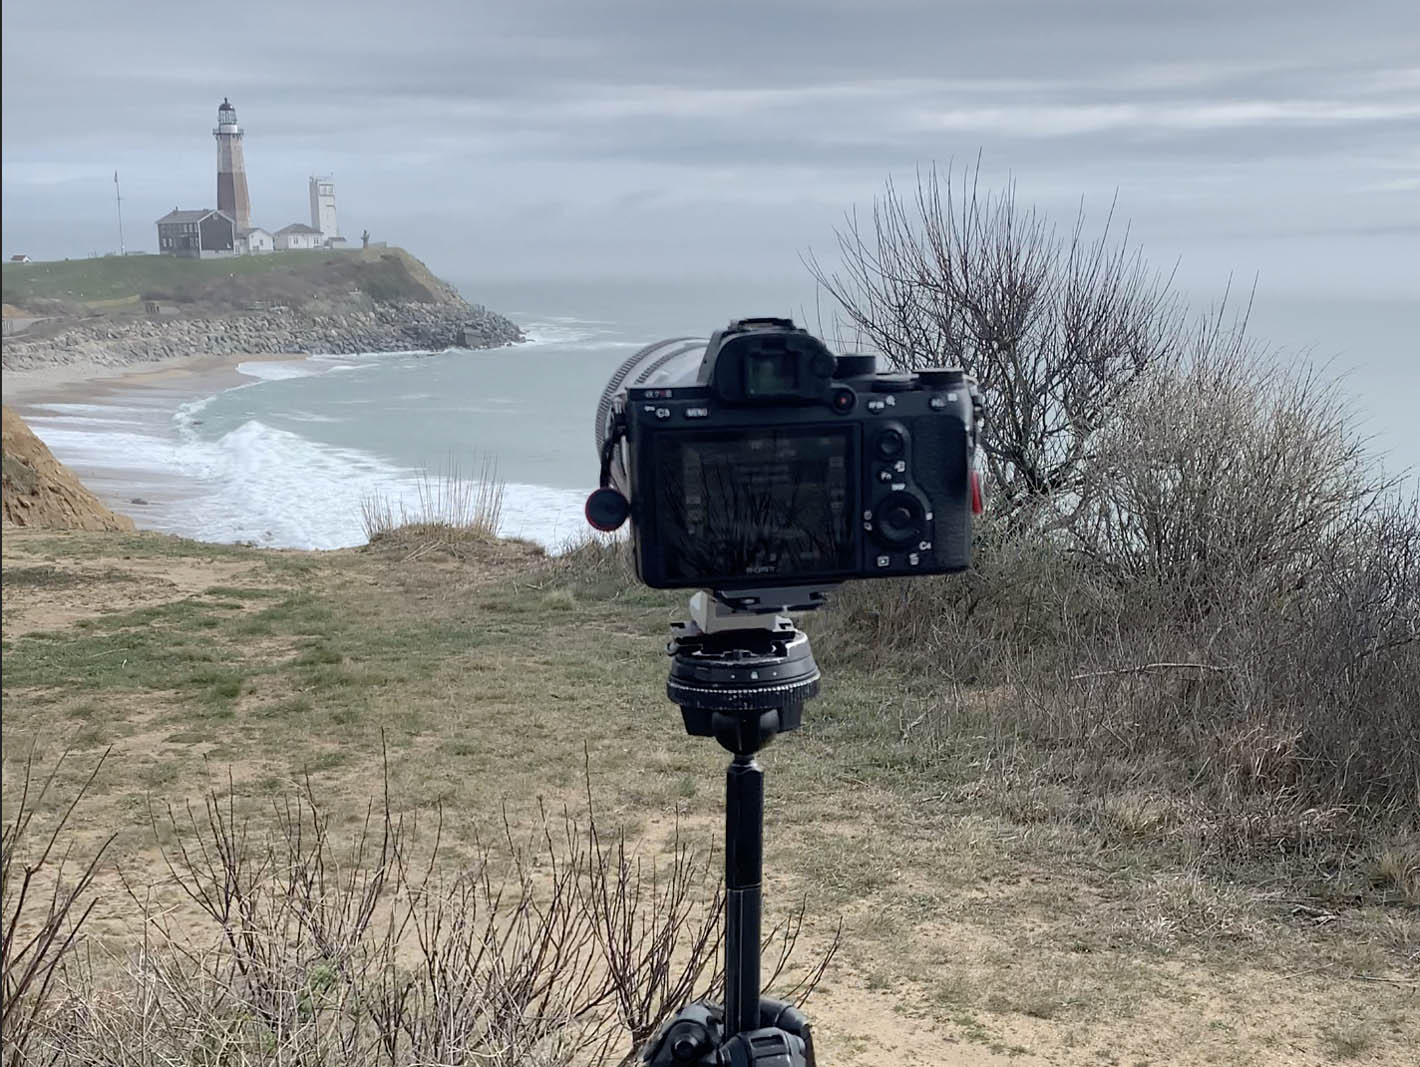 A camera on a tripod taking a time lapse or hyperlapse of a lighthouse in Montauk, New York.